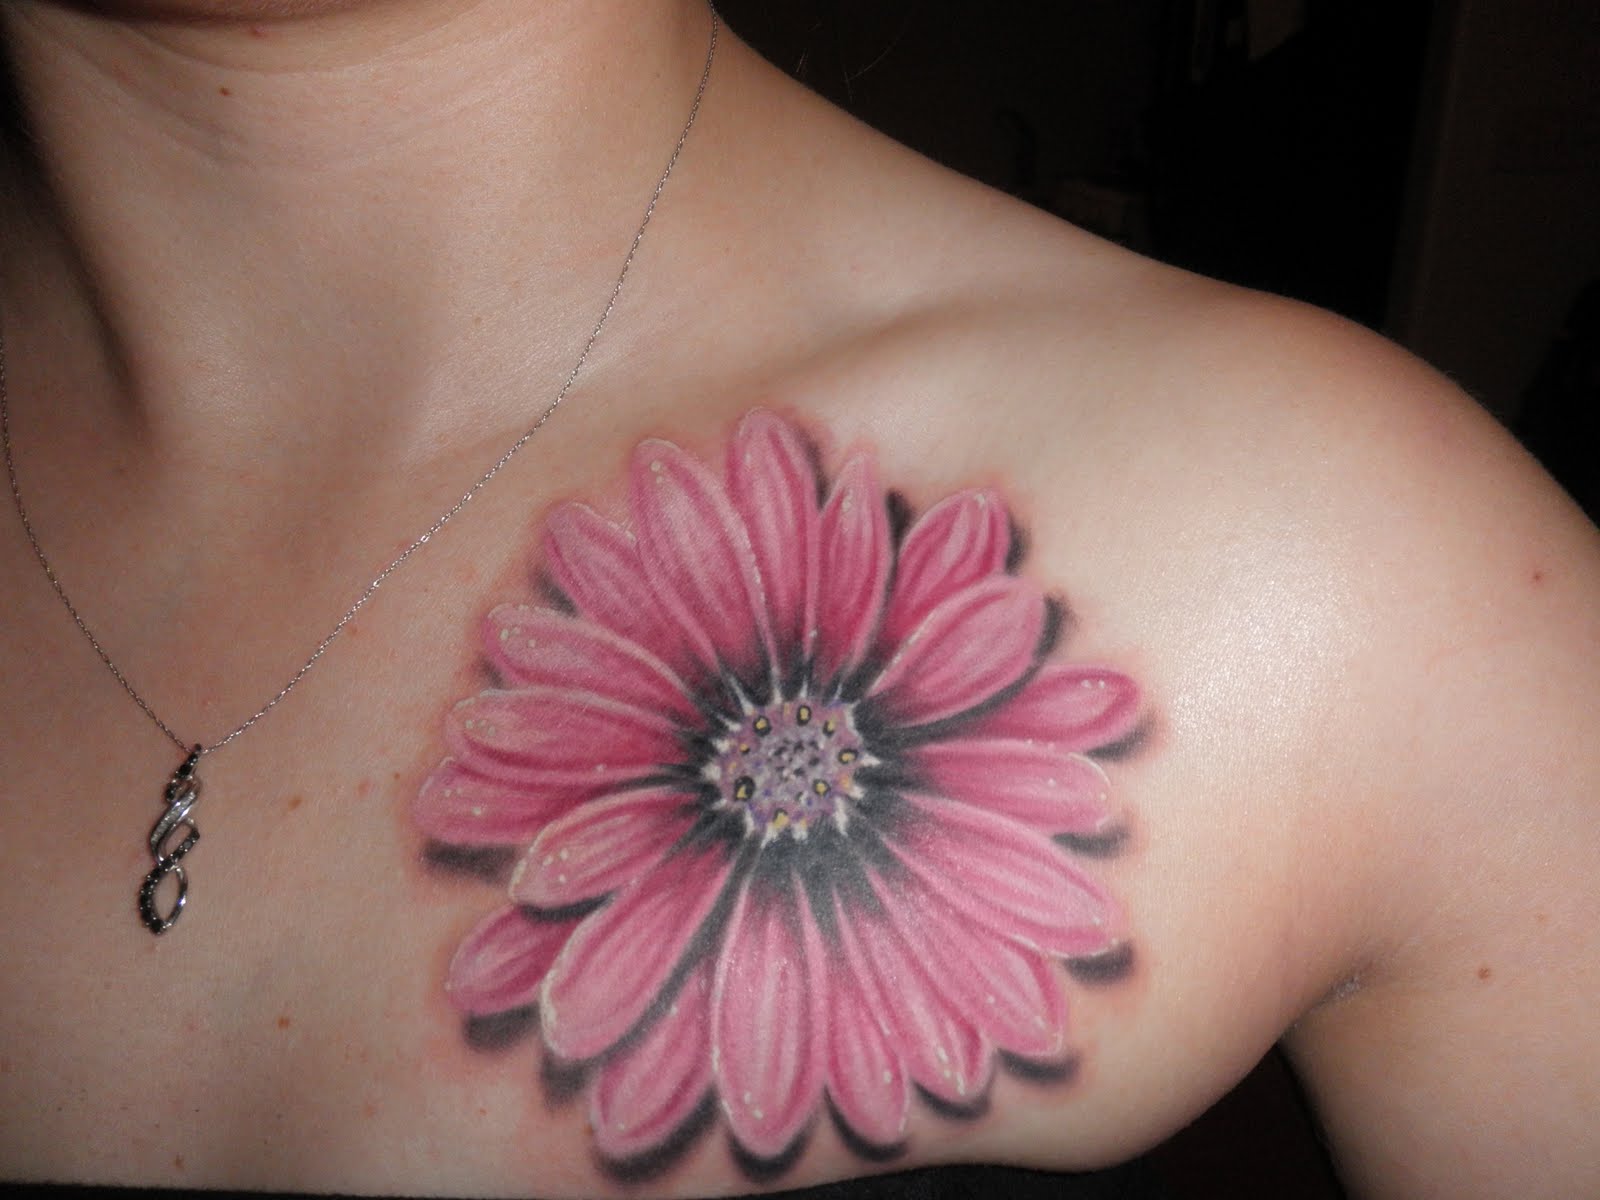 Tattoo Designs with Flowers - wide 6